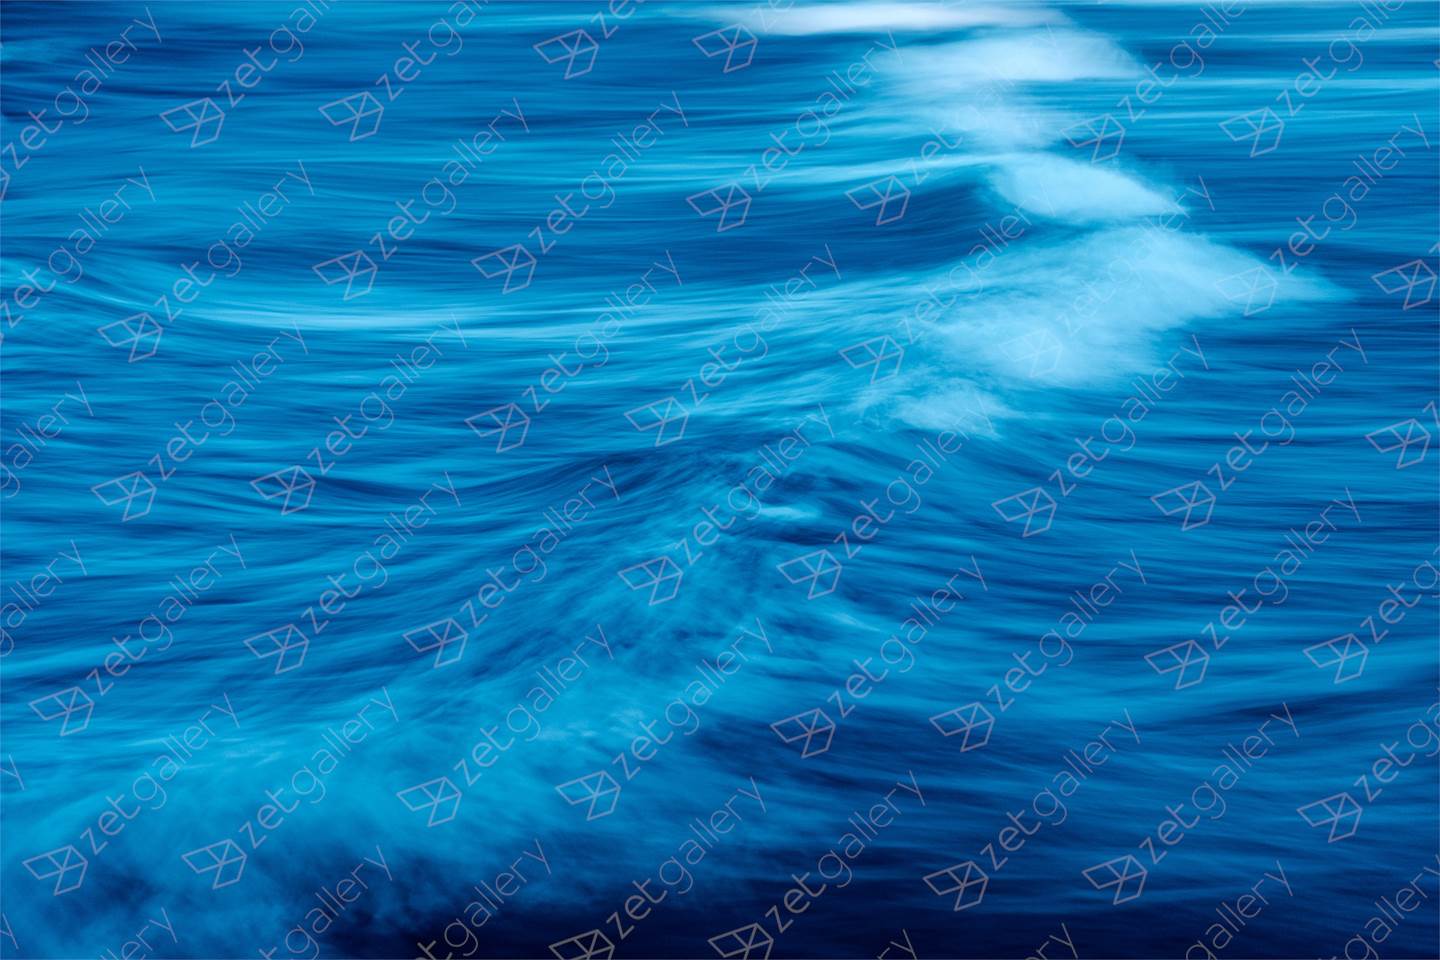 BLUE WAVE, Large Edition 1 of 5, original Abstract Digital Photography by Benjamin Lurie